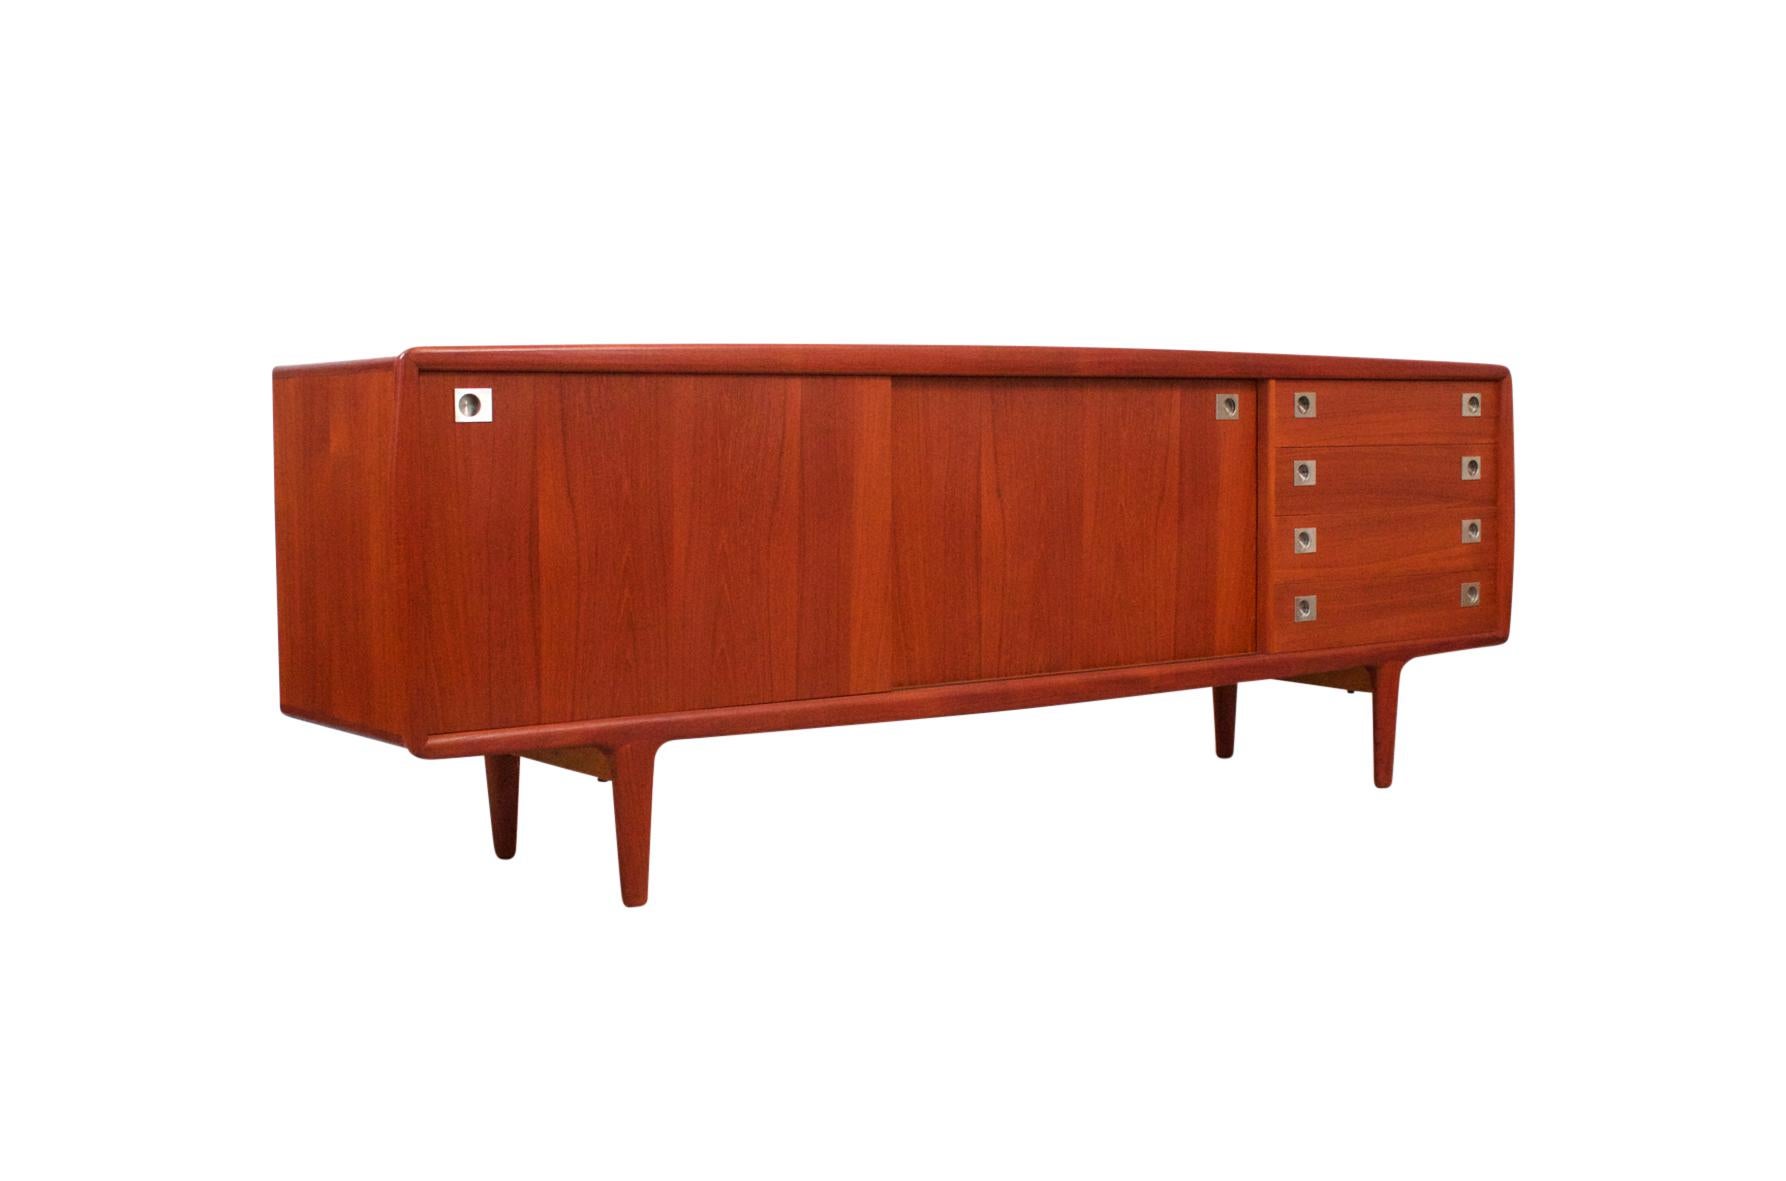 Teak cabinet by Danish furniture maker H.P. Hansen. Sliding doors and drawers with polished steel pulls.

____

We're offering our customers free domestic shipping on all items during the current health crisis. We will also offer free or deeply